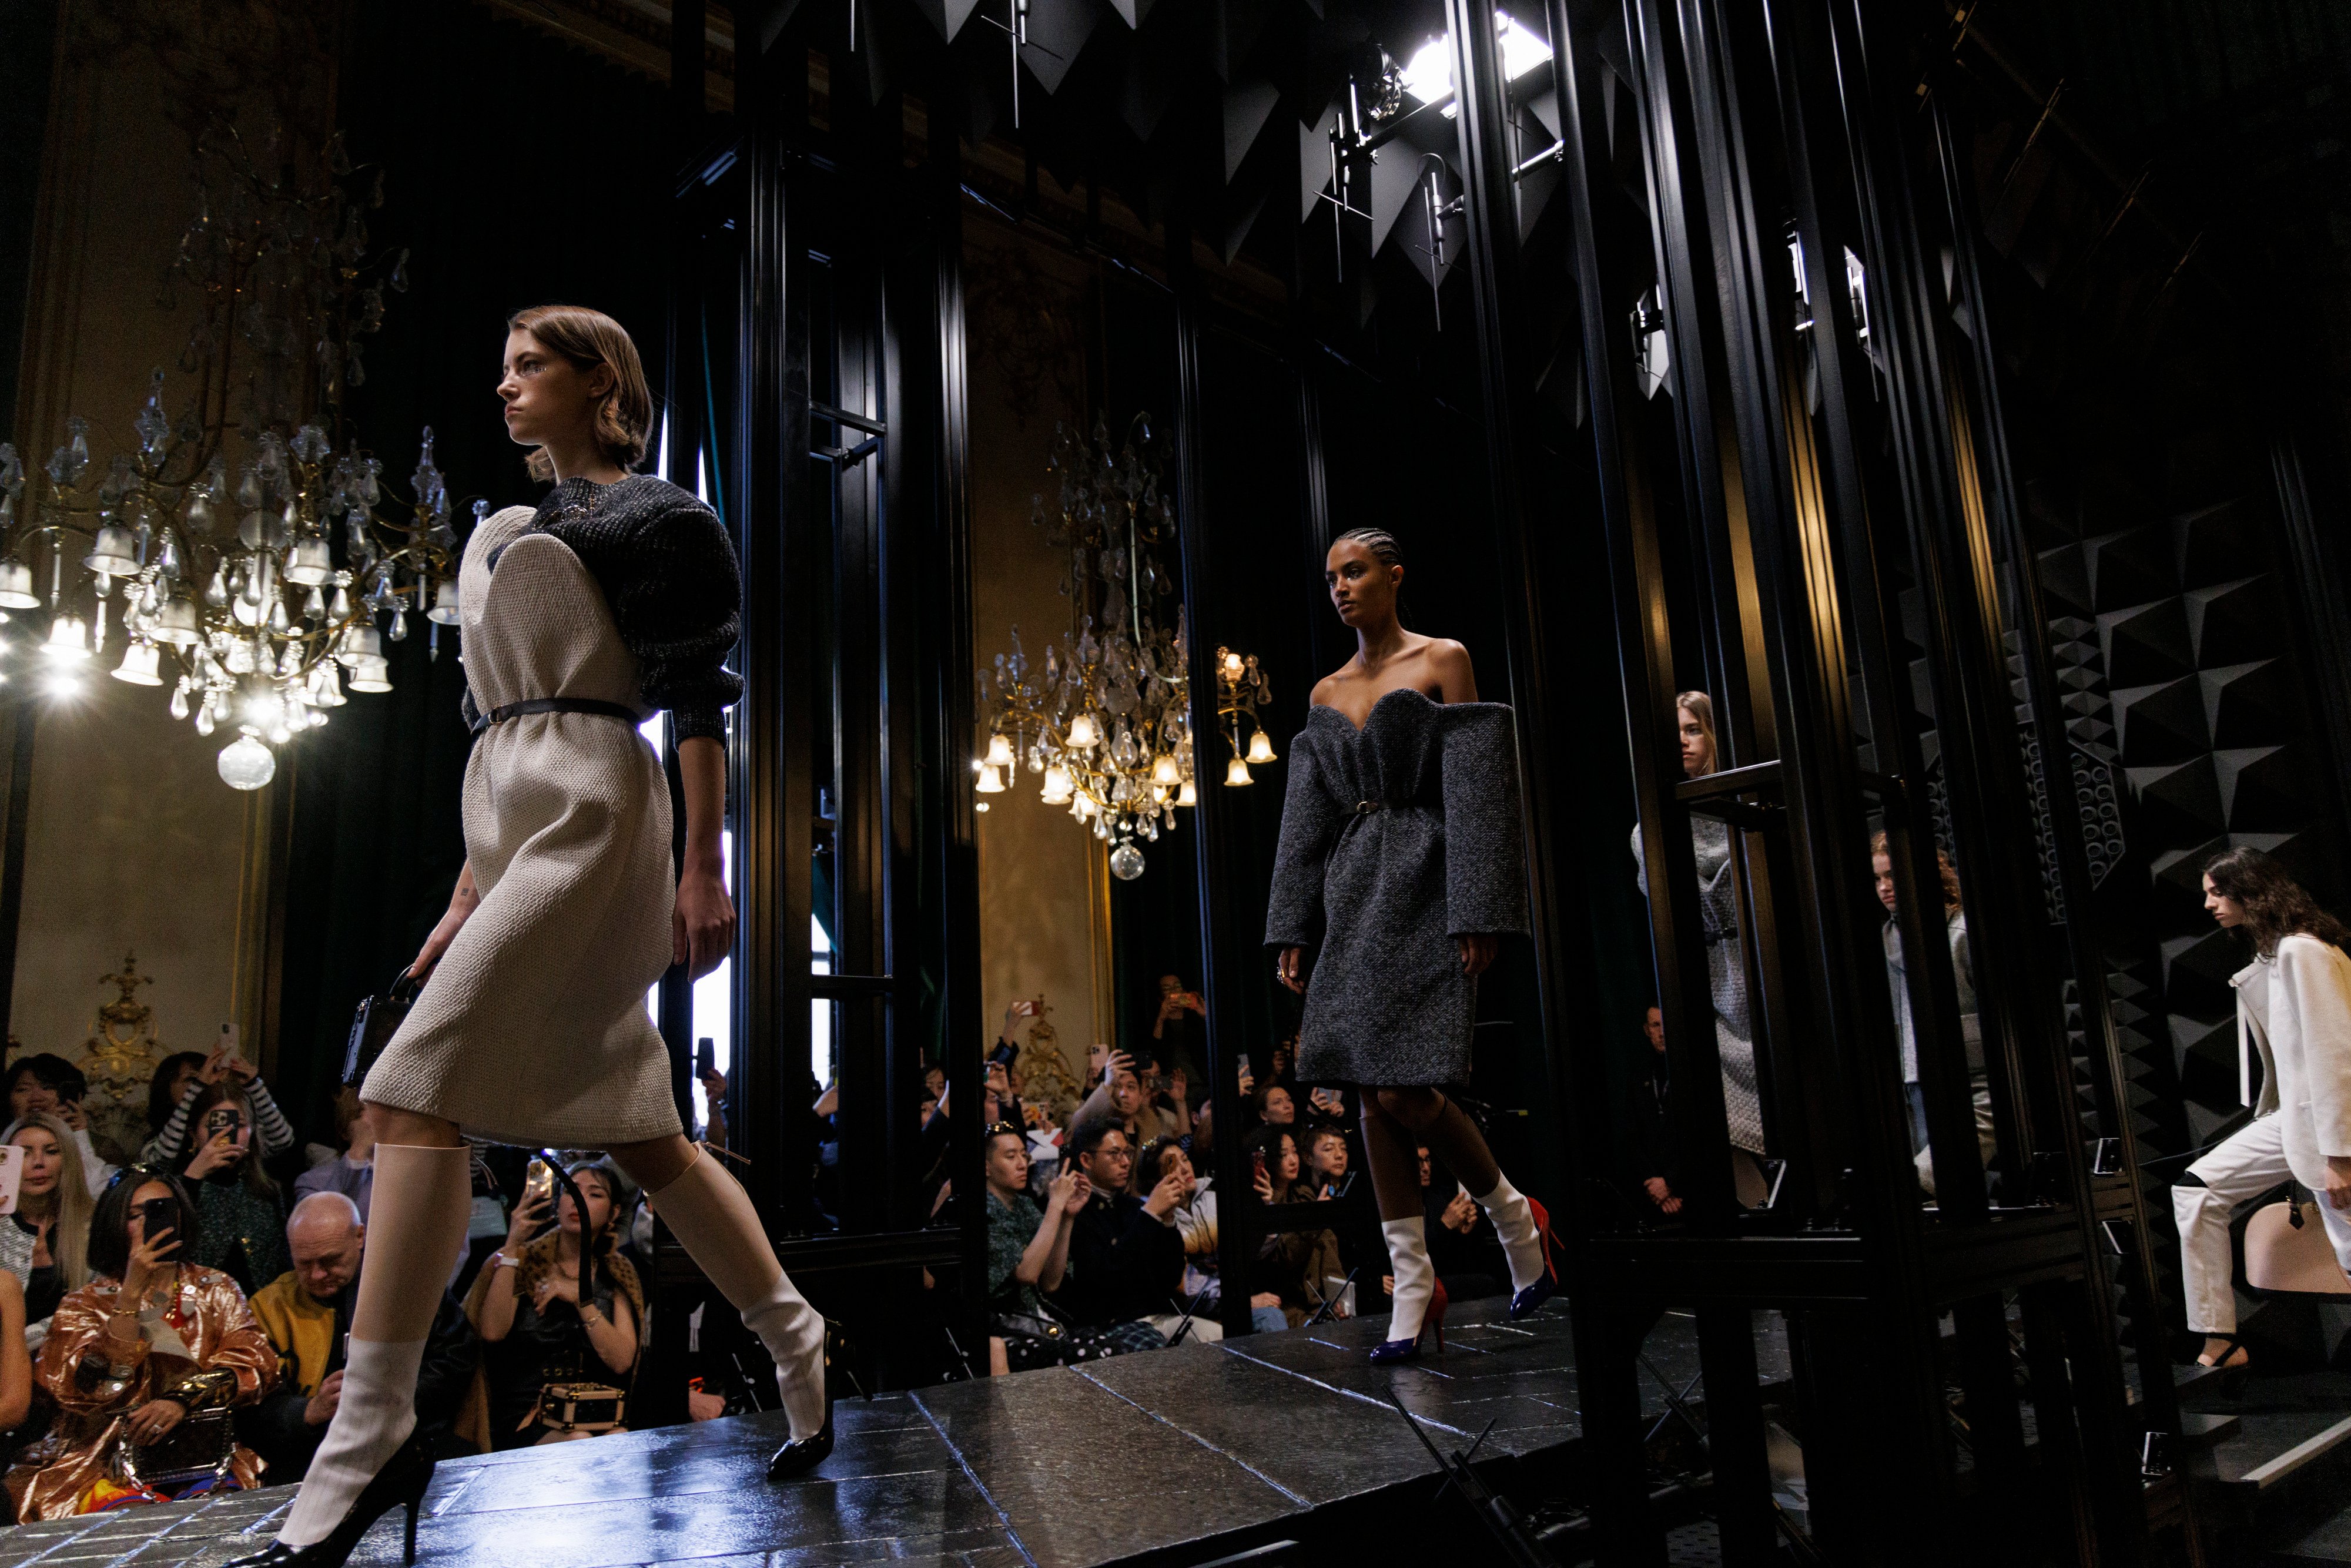 Louis Vuitton shows playful, French styles at Musee d'Orsay in